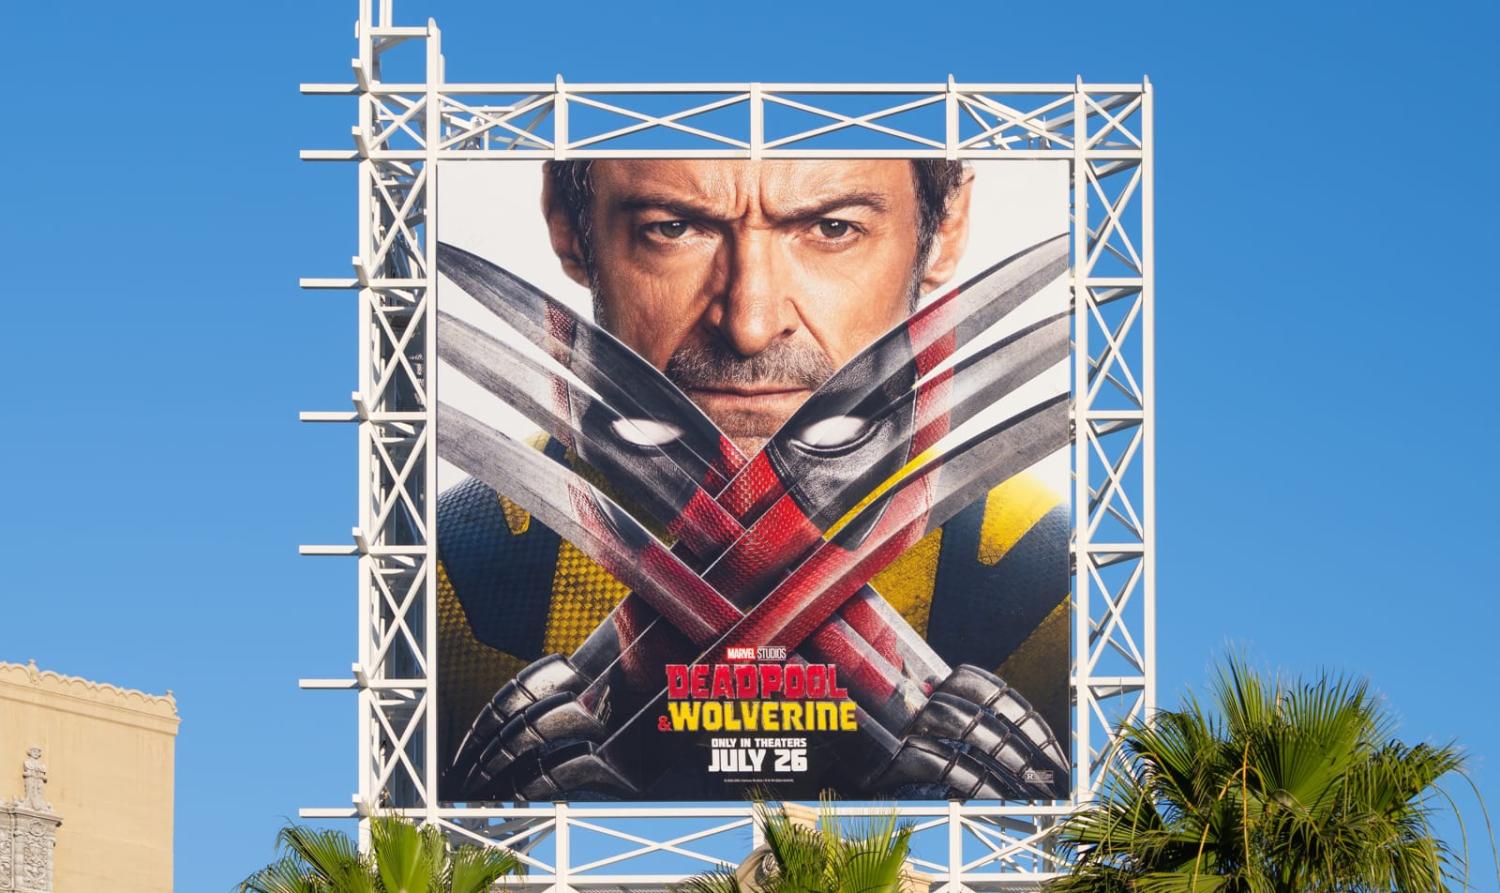 A billboard for Deadpool & Wolverine in Hollywood, California (AaronP/Bauer-Griffin/GC Images)